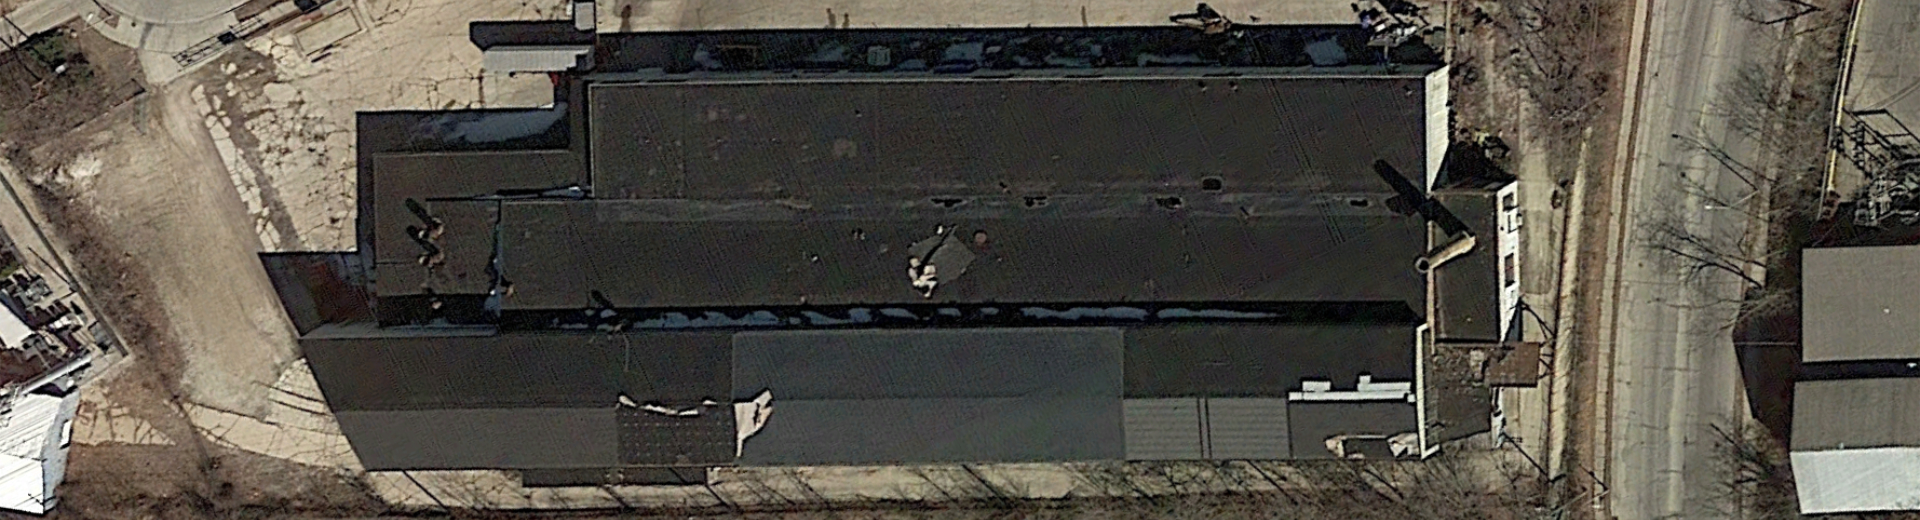 Satellite Imagery of Roof